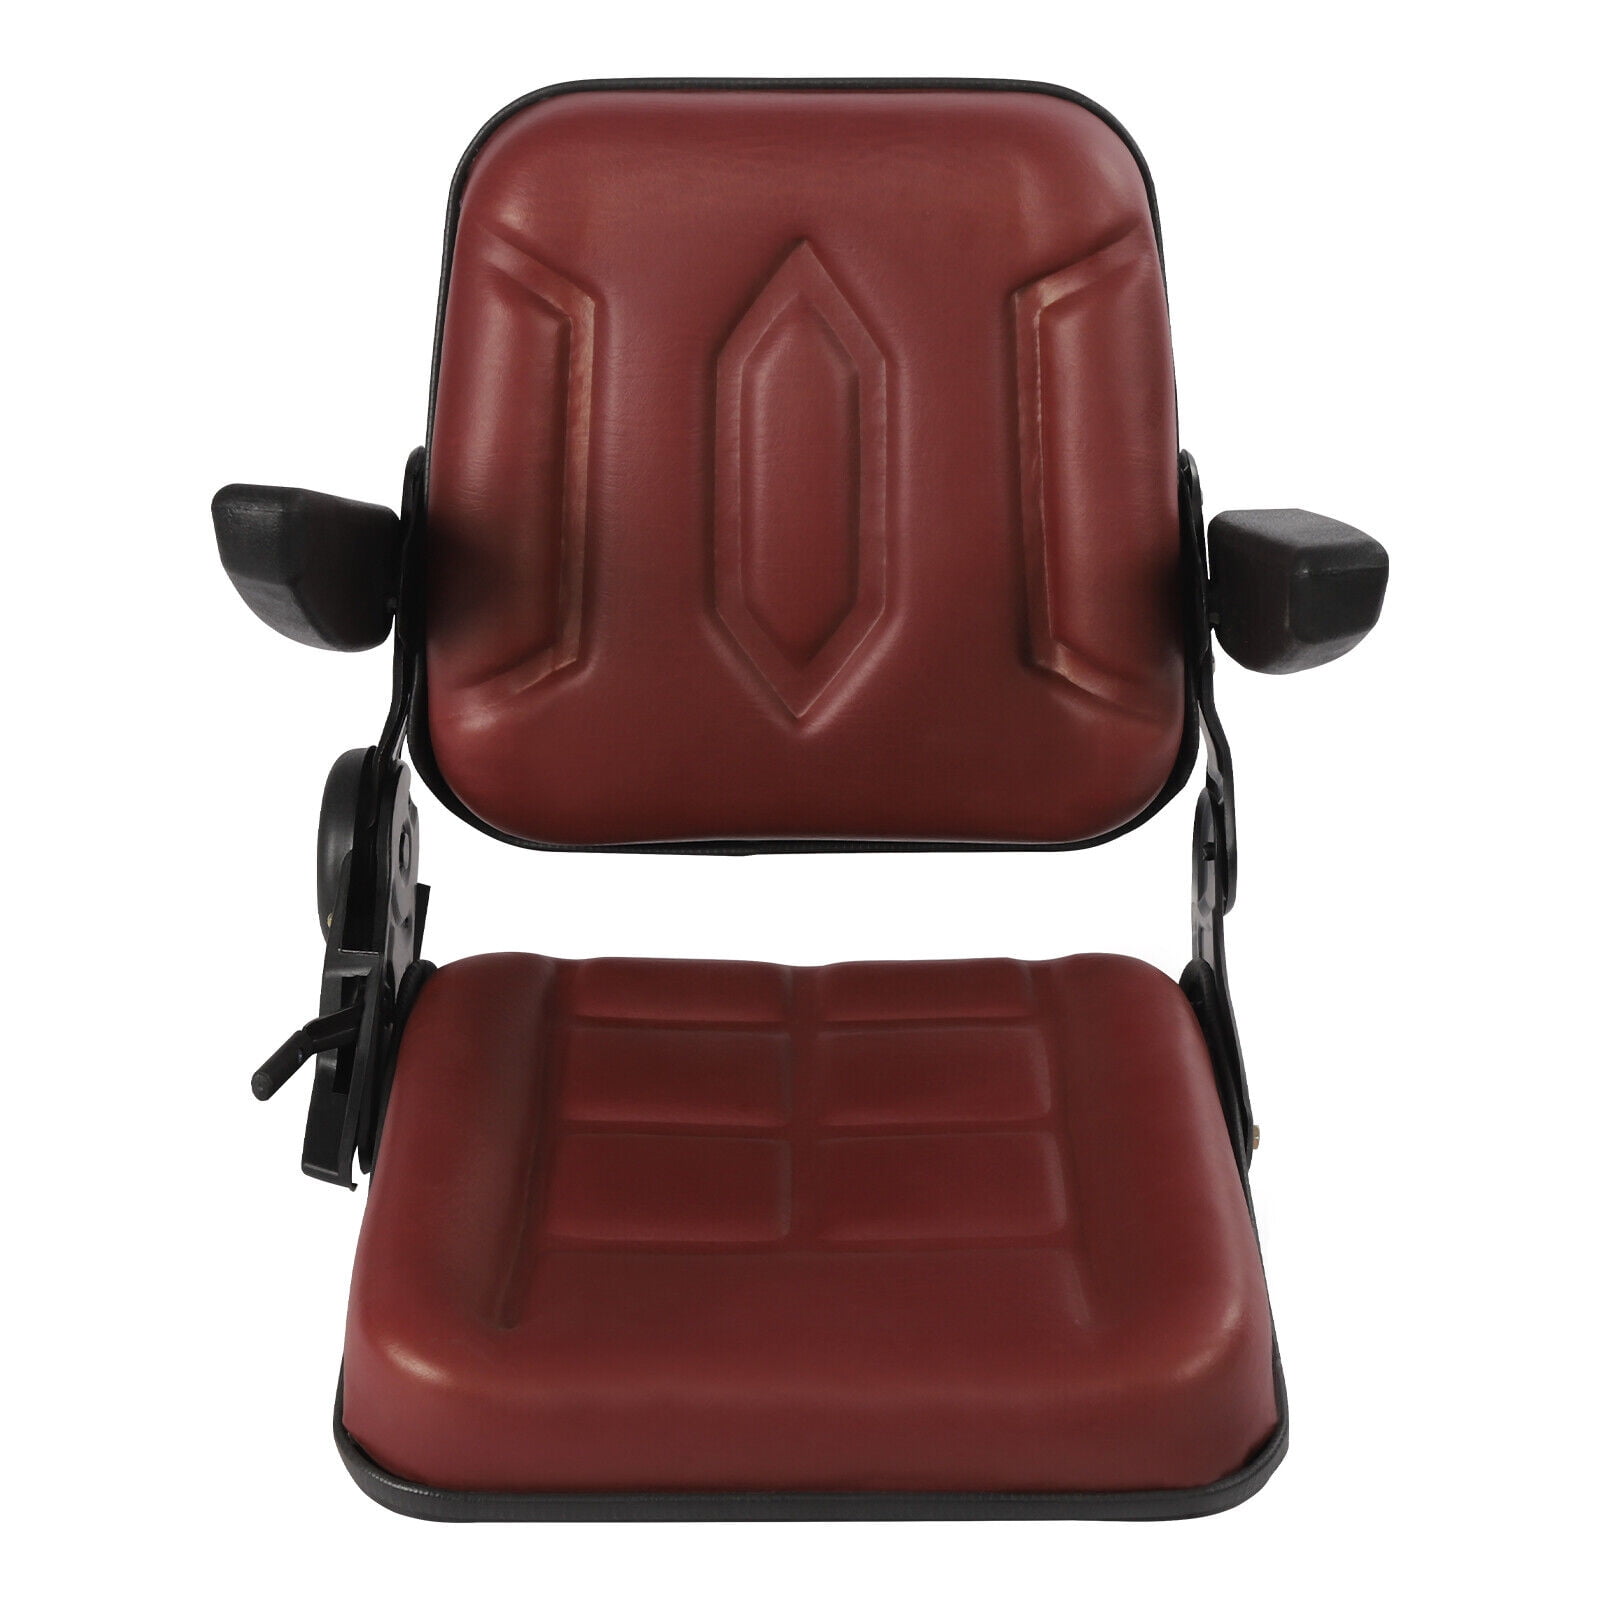 KLARA SEATS Tractor Seat Tractor Seat Universal Seat Tractor Seat Vintage  Car Spring-Loaded KS 44/2V PVC Red Tilt Adjustable with Shock Absorber and